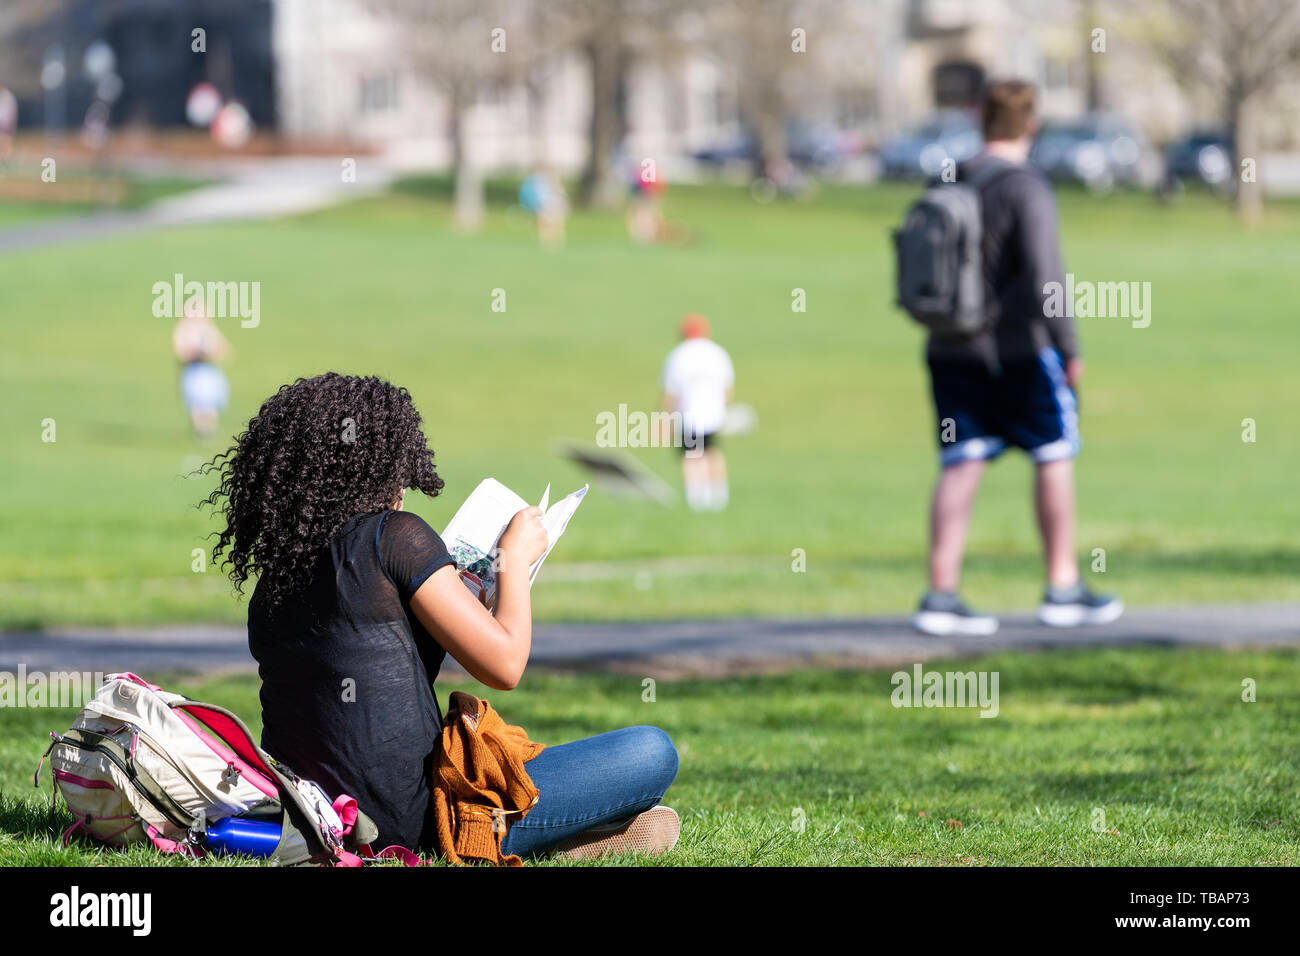 Blacksburg, USA - April 18, 2018: Virginia Tech Polytechnic Institute and State University College campus with student sitting reading book on grass Stock Photo